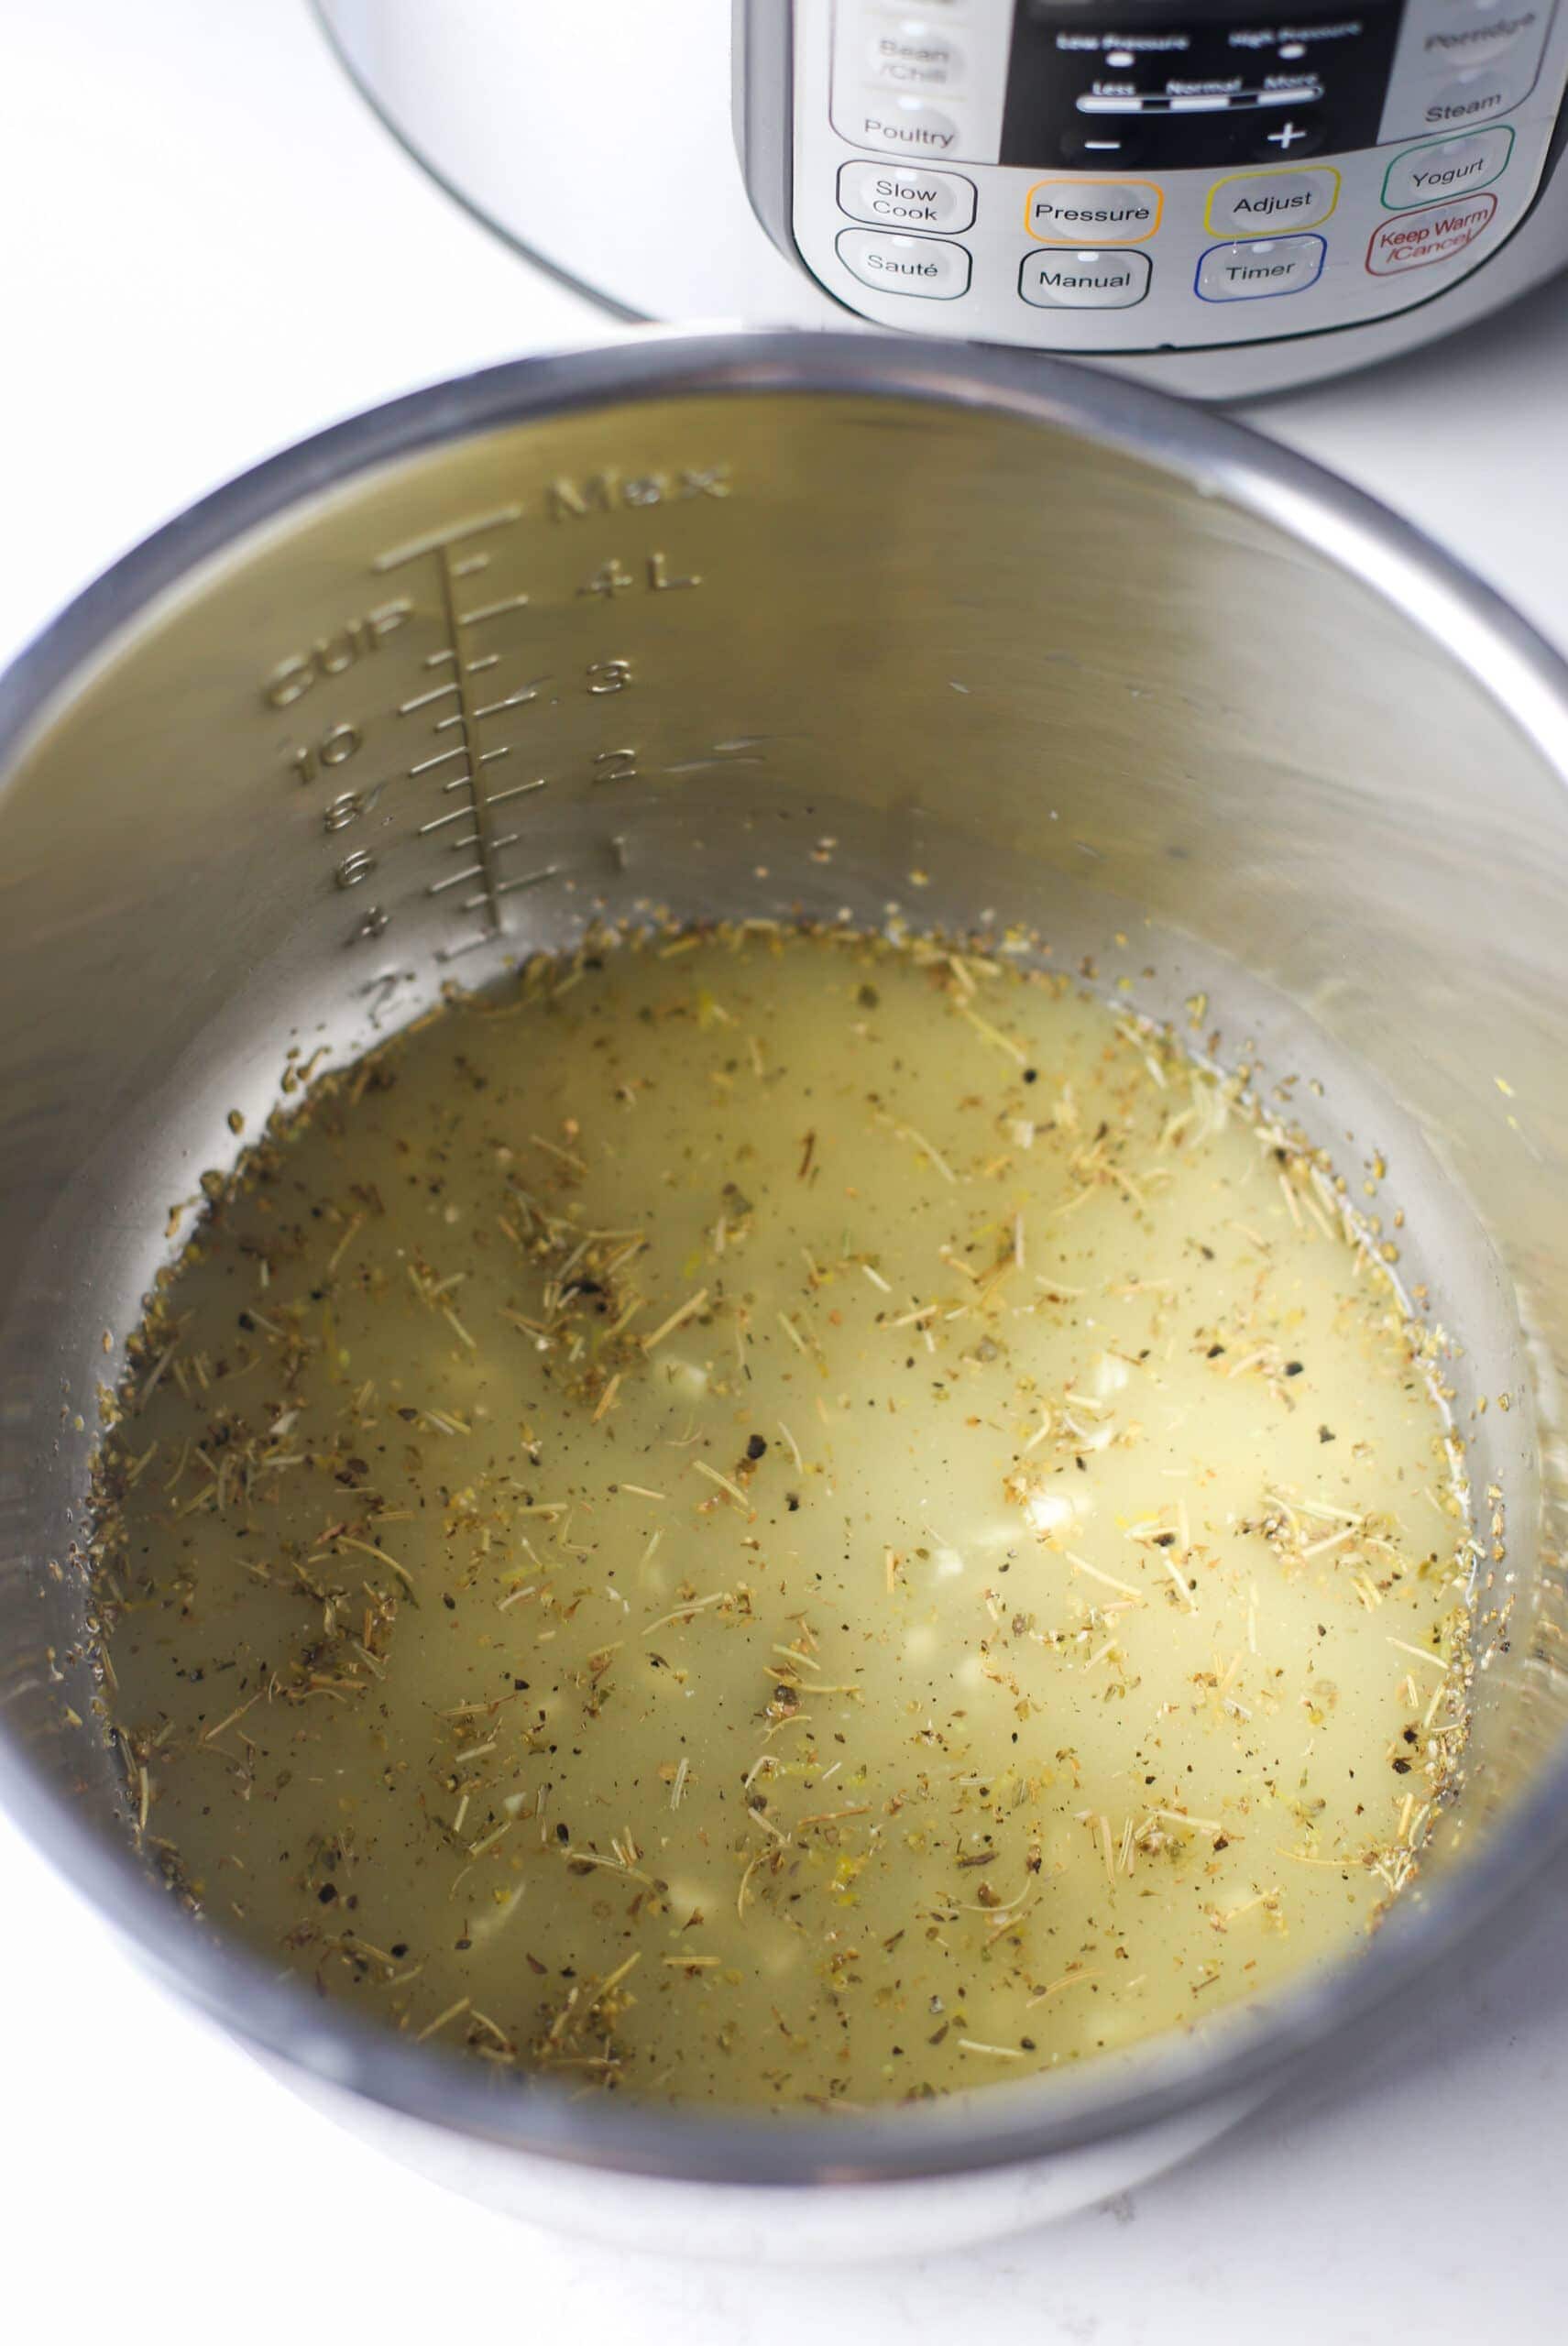 Chicken broth, lemon juice and zest, garlic, and dried herbs mixed together in the Instant Pot.